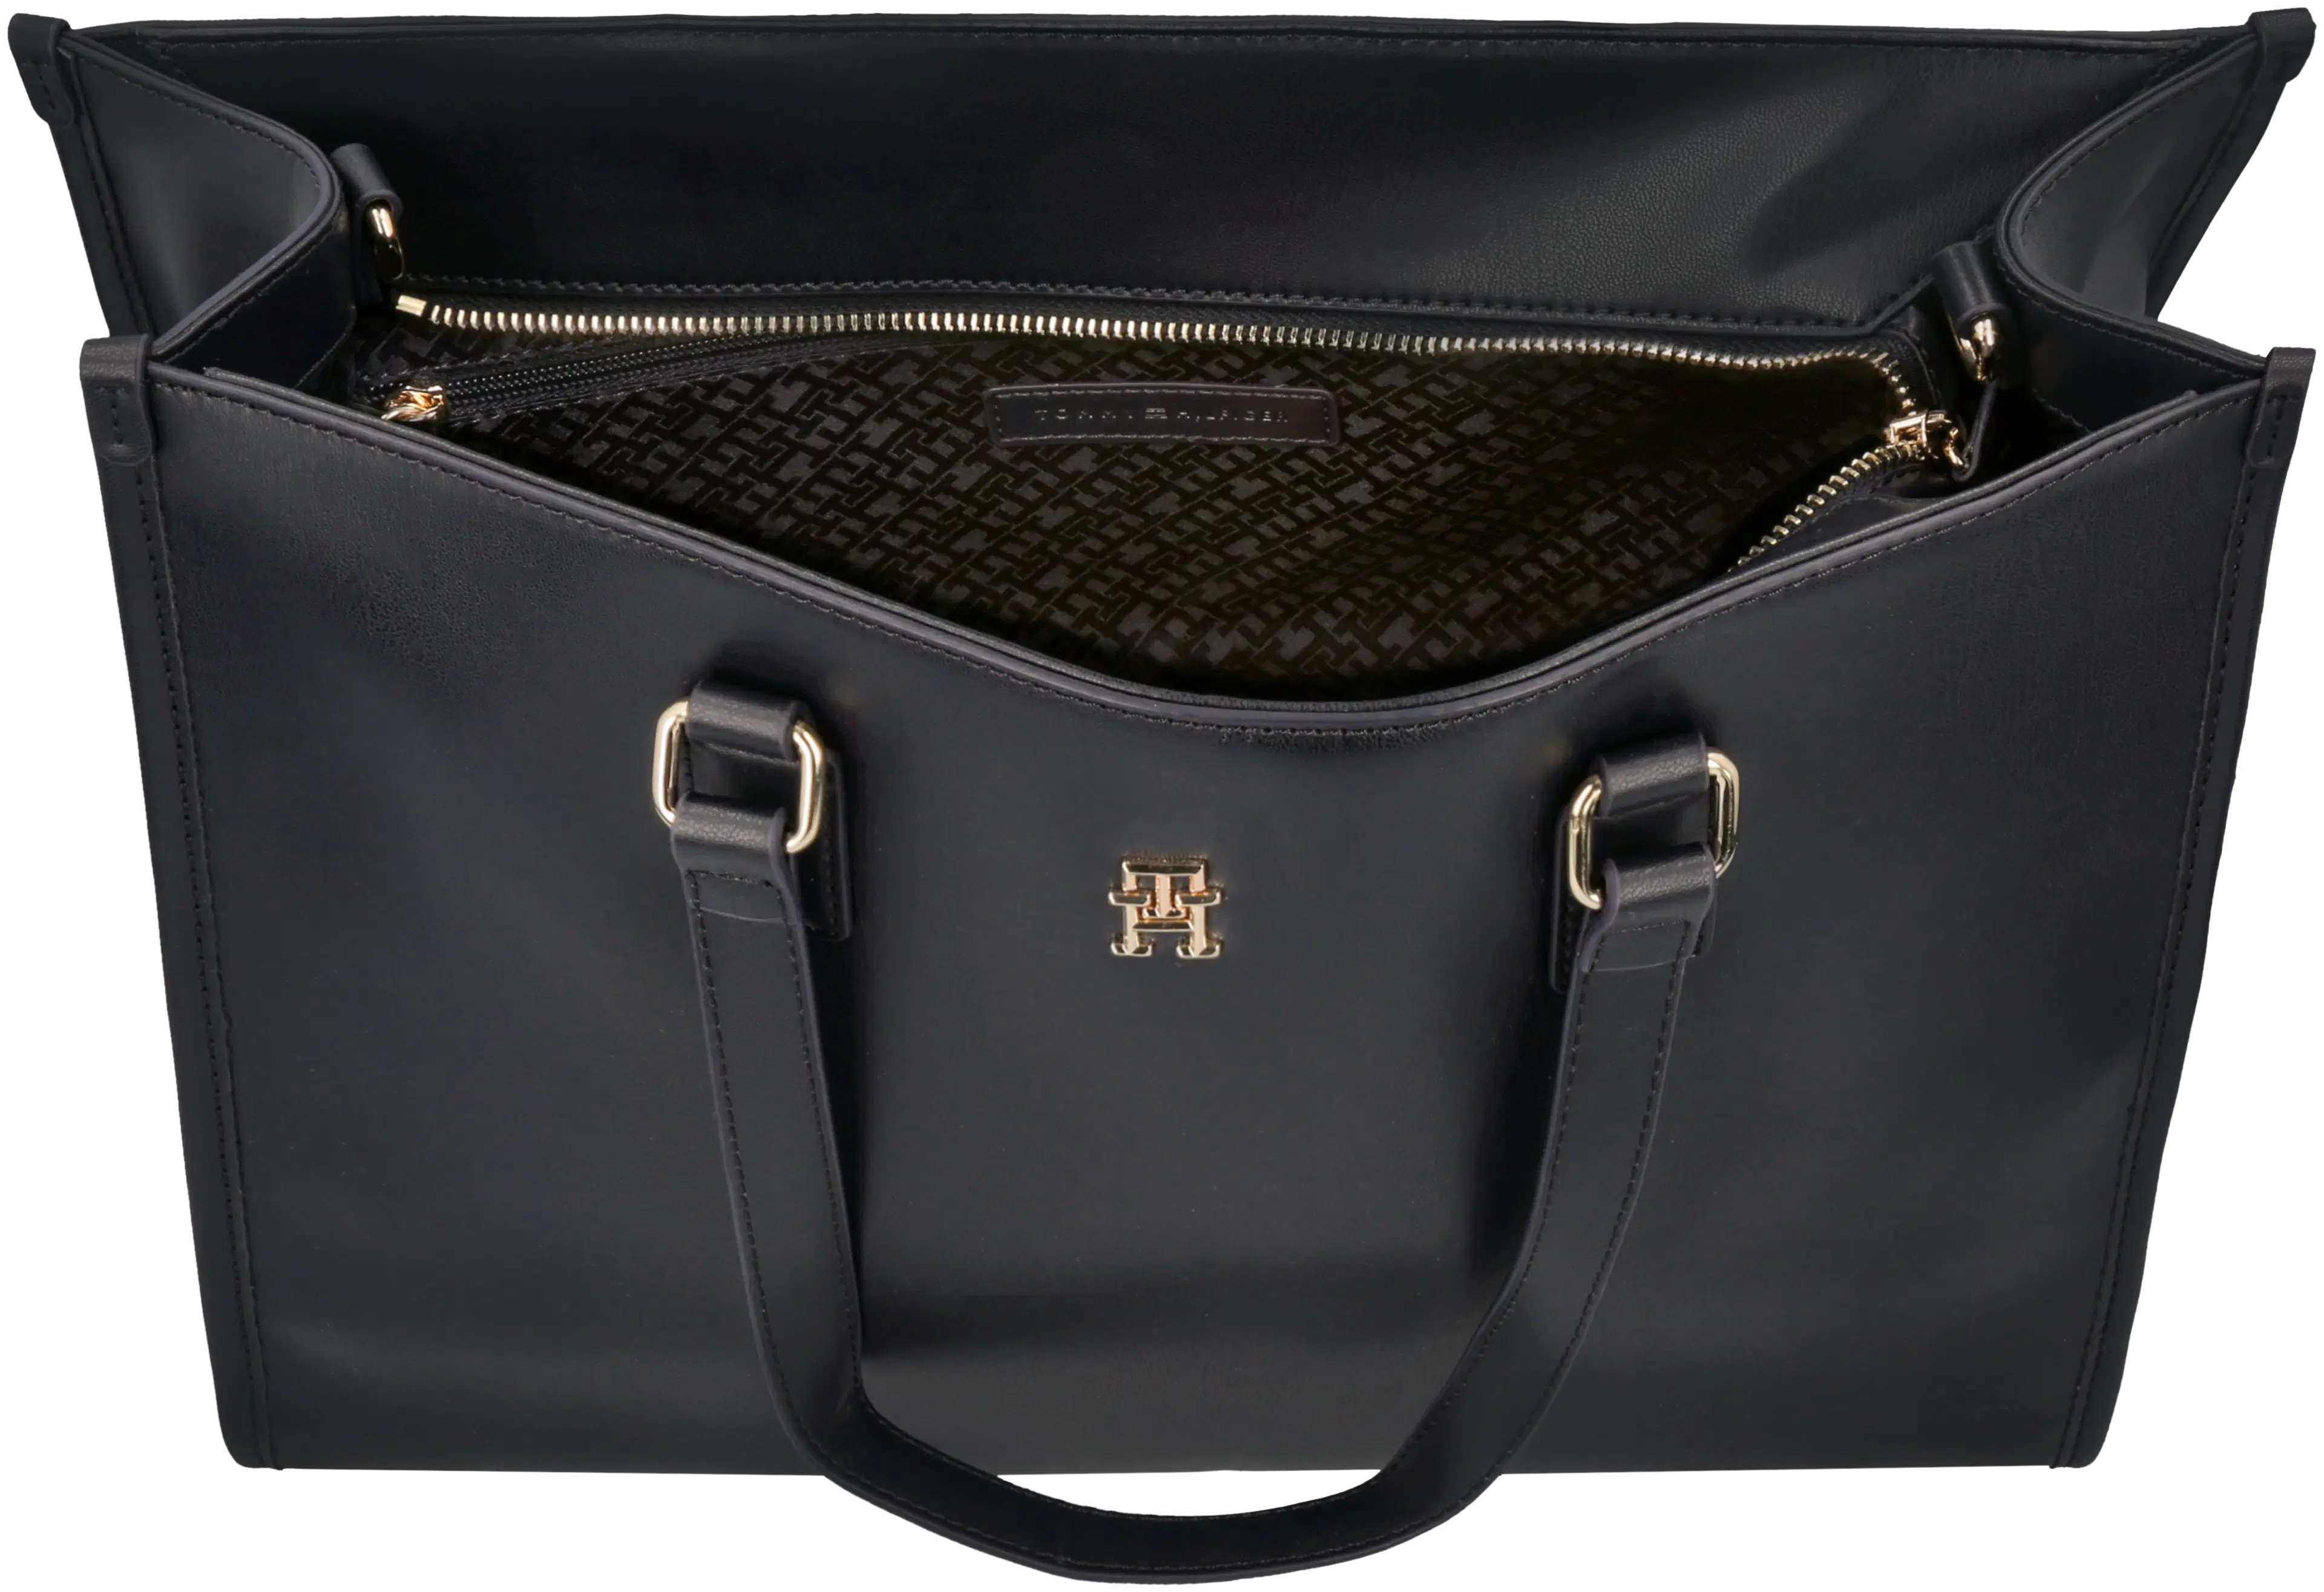 Tommy Hilfiger TH Monotype tote olkakassi